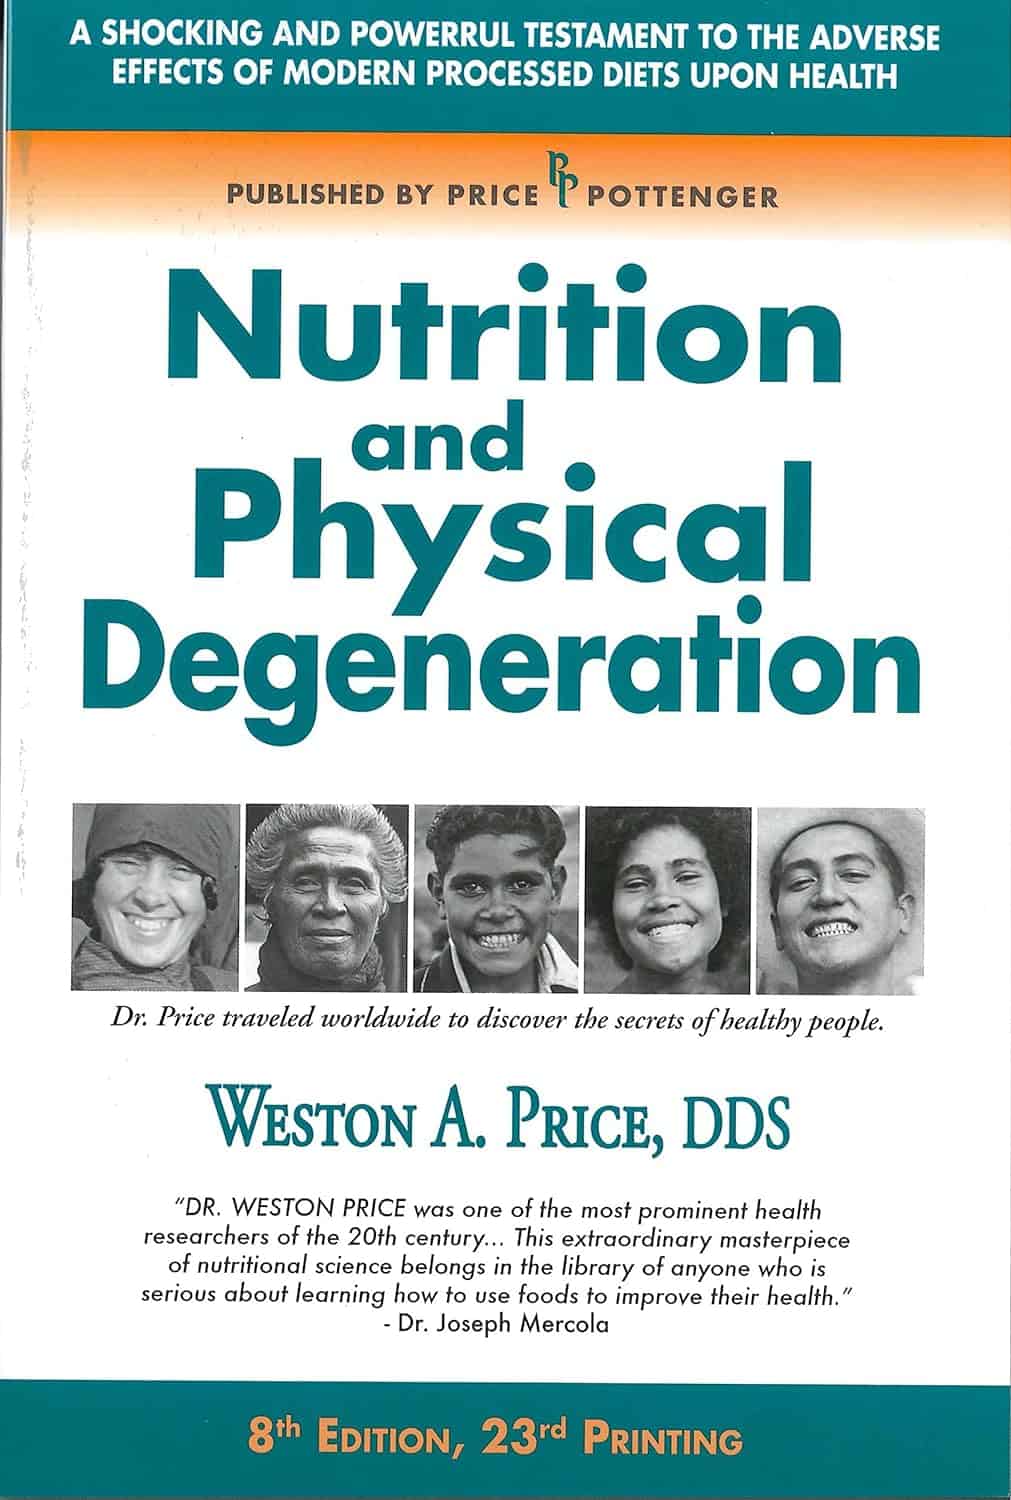 Nutrition and Physical Degeneration – Weston A. Price